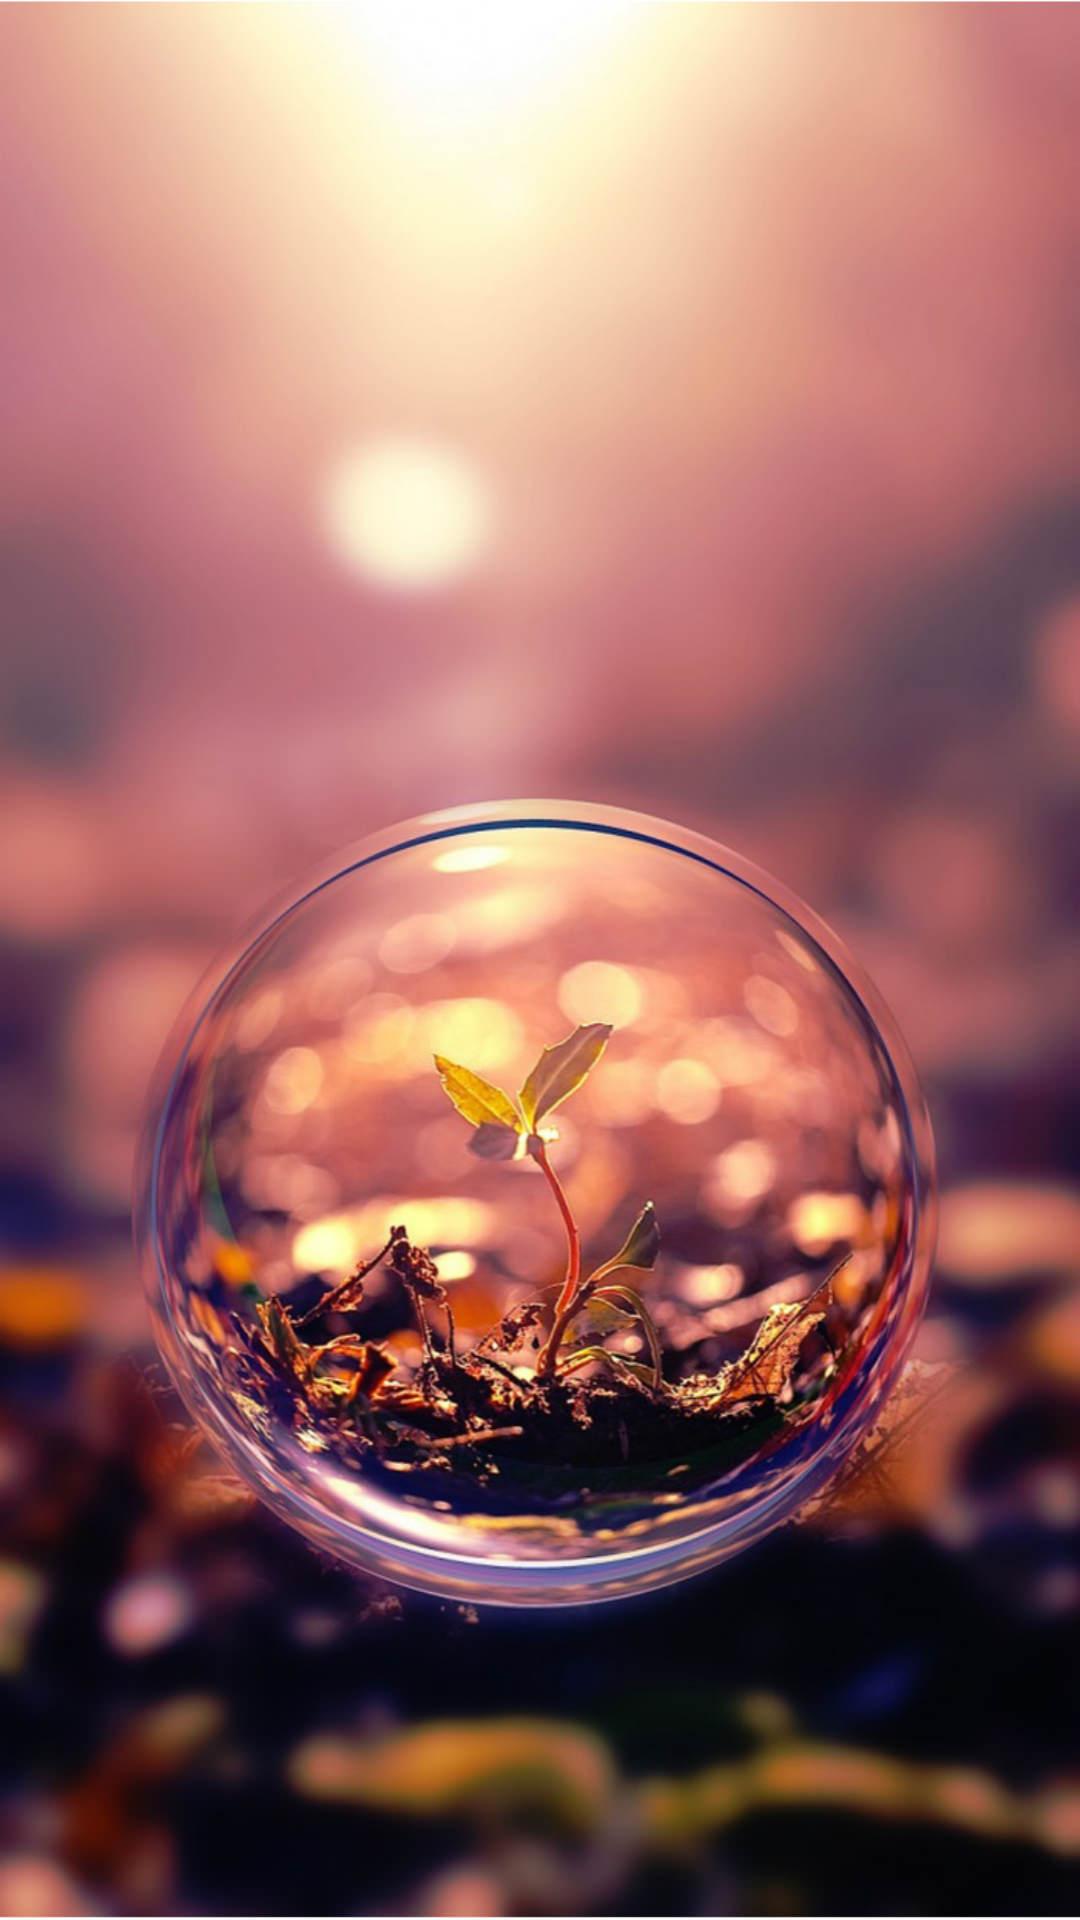 Wallpaper.wiki Beautiful Vintage Micro Photography Water Bubbled